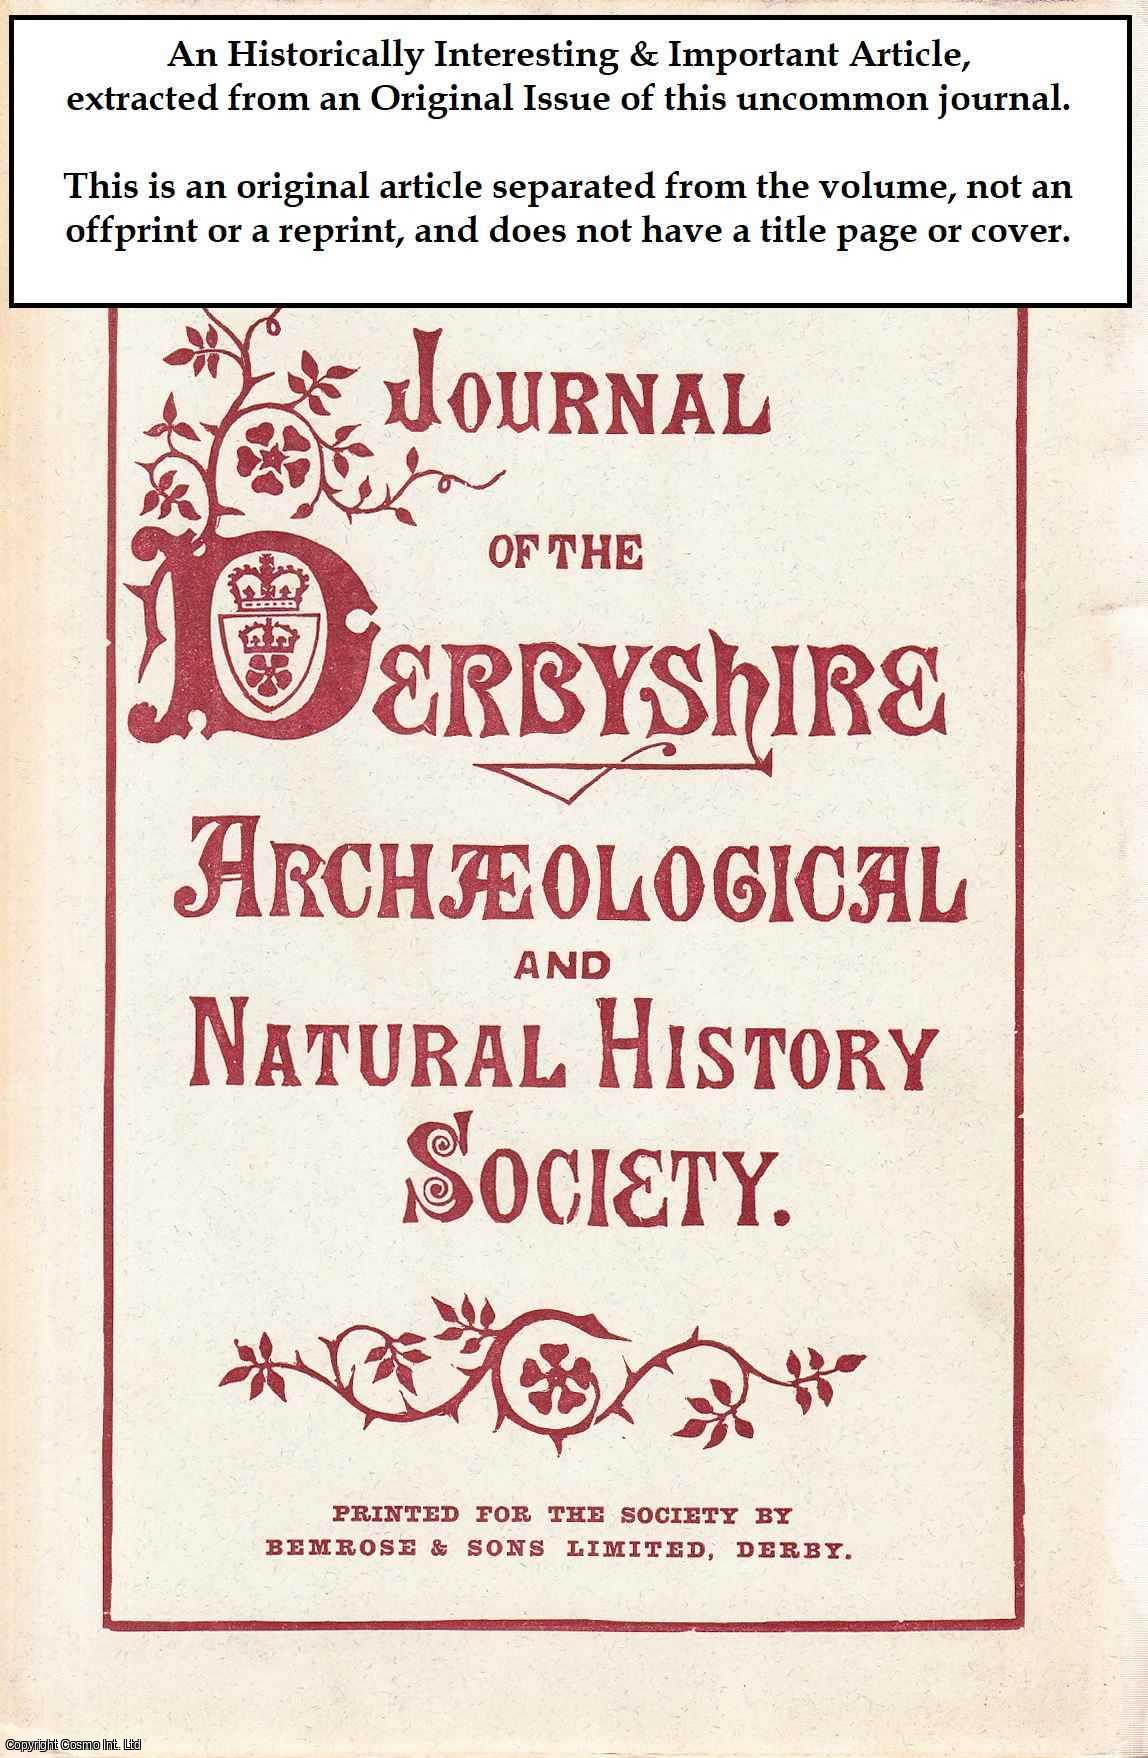 Nathan Ball - The Recent Discovery of Roman Coins at Shipley, with some Remarks on Treasure Trove in General. An original article from the Journal of the Derbyshire Archaeological & Natural History Society, 1891.